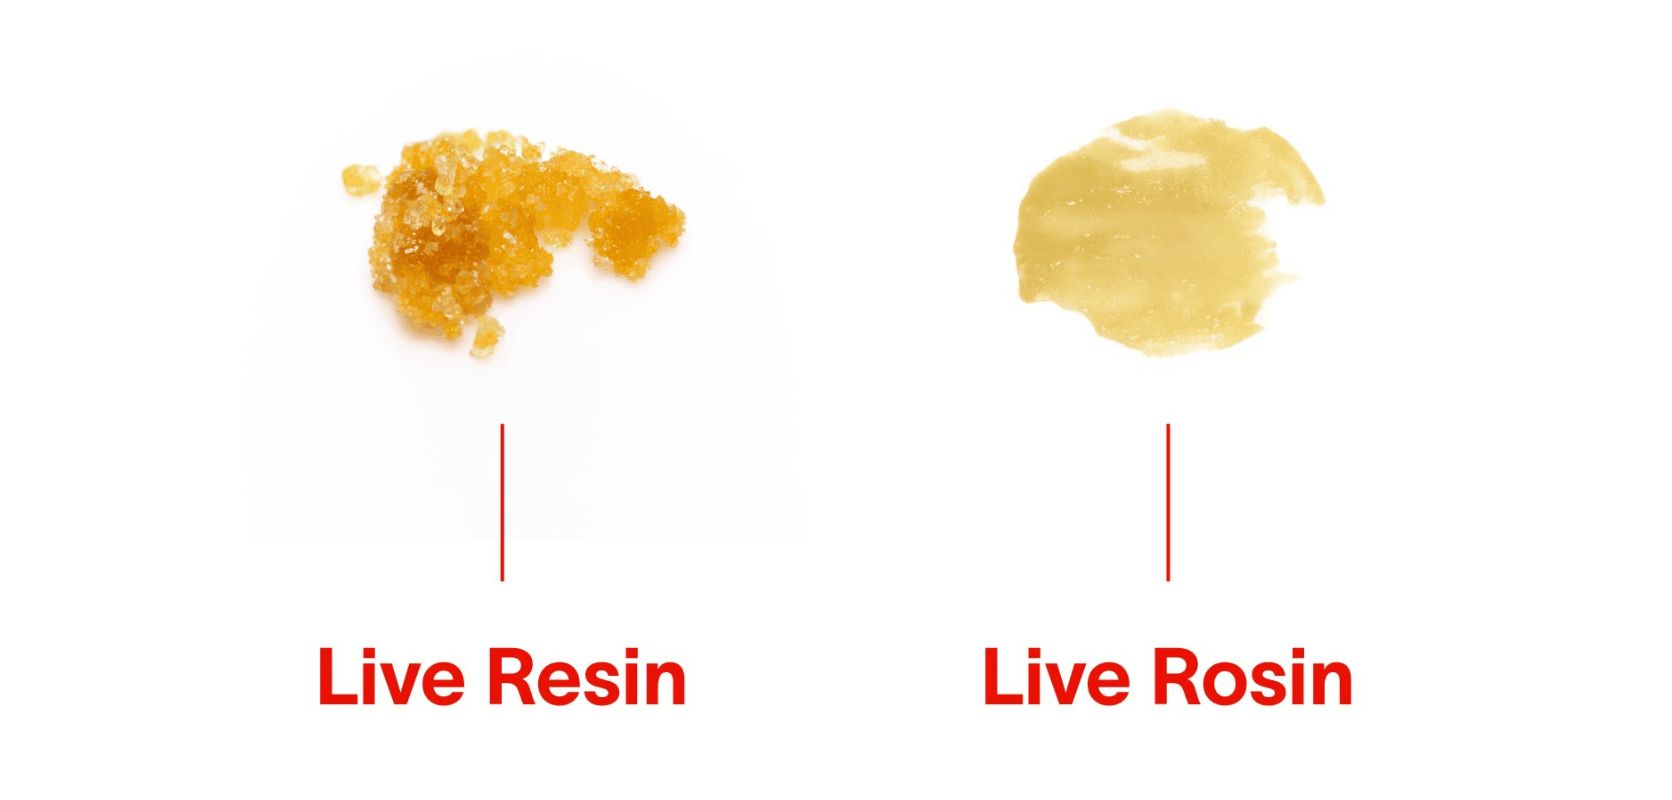 The main difference between live rosin and rosin boils down to the extraction method used. Rosin is formed using a solventless extraction method, while live rosin is created using a solvent-based extraction method. 